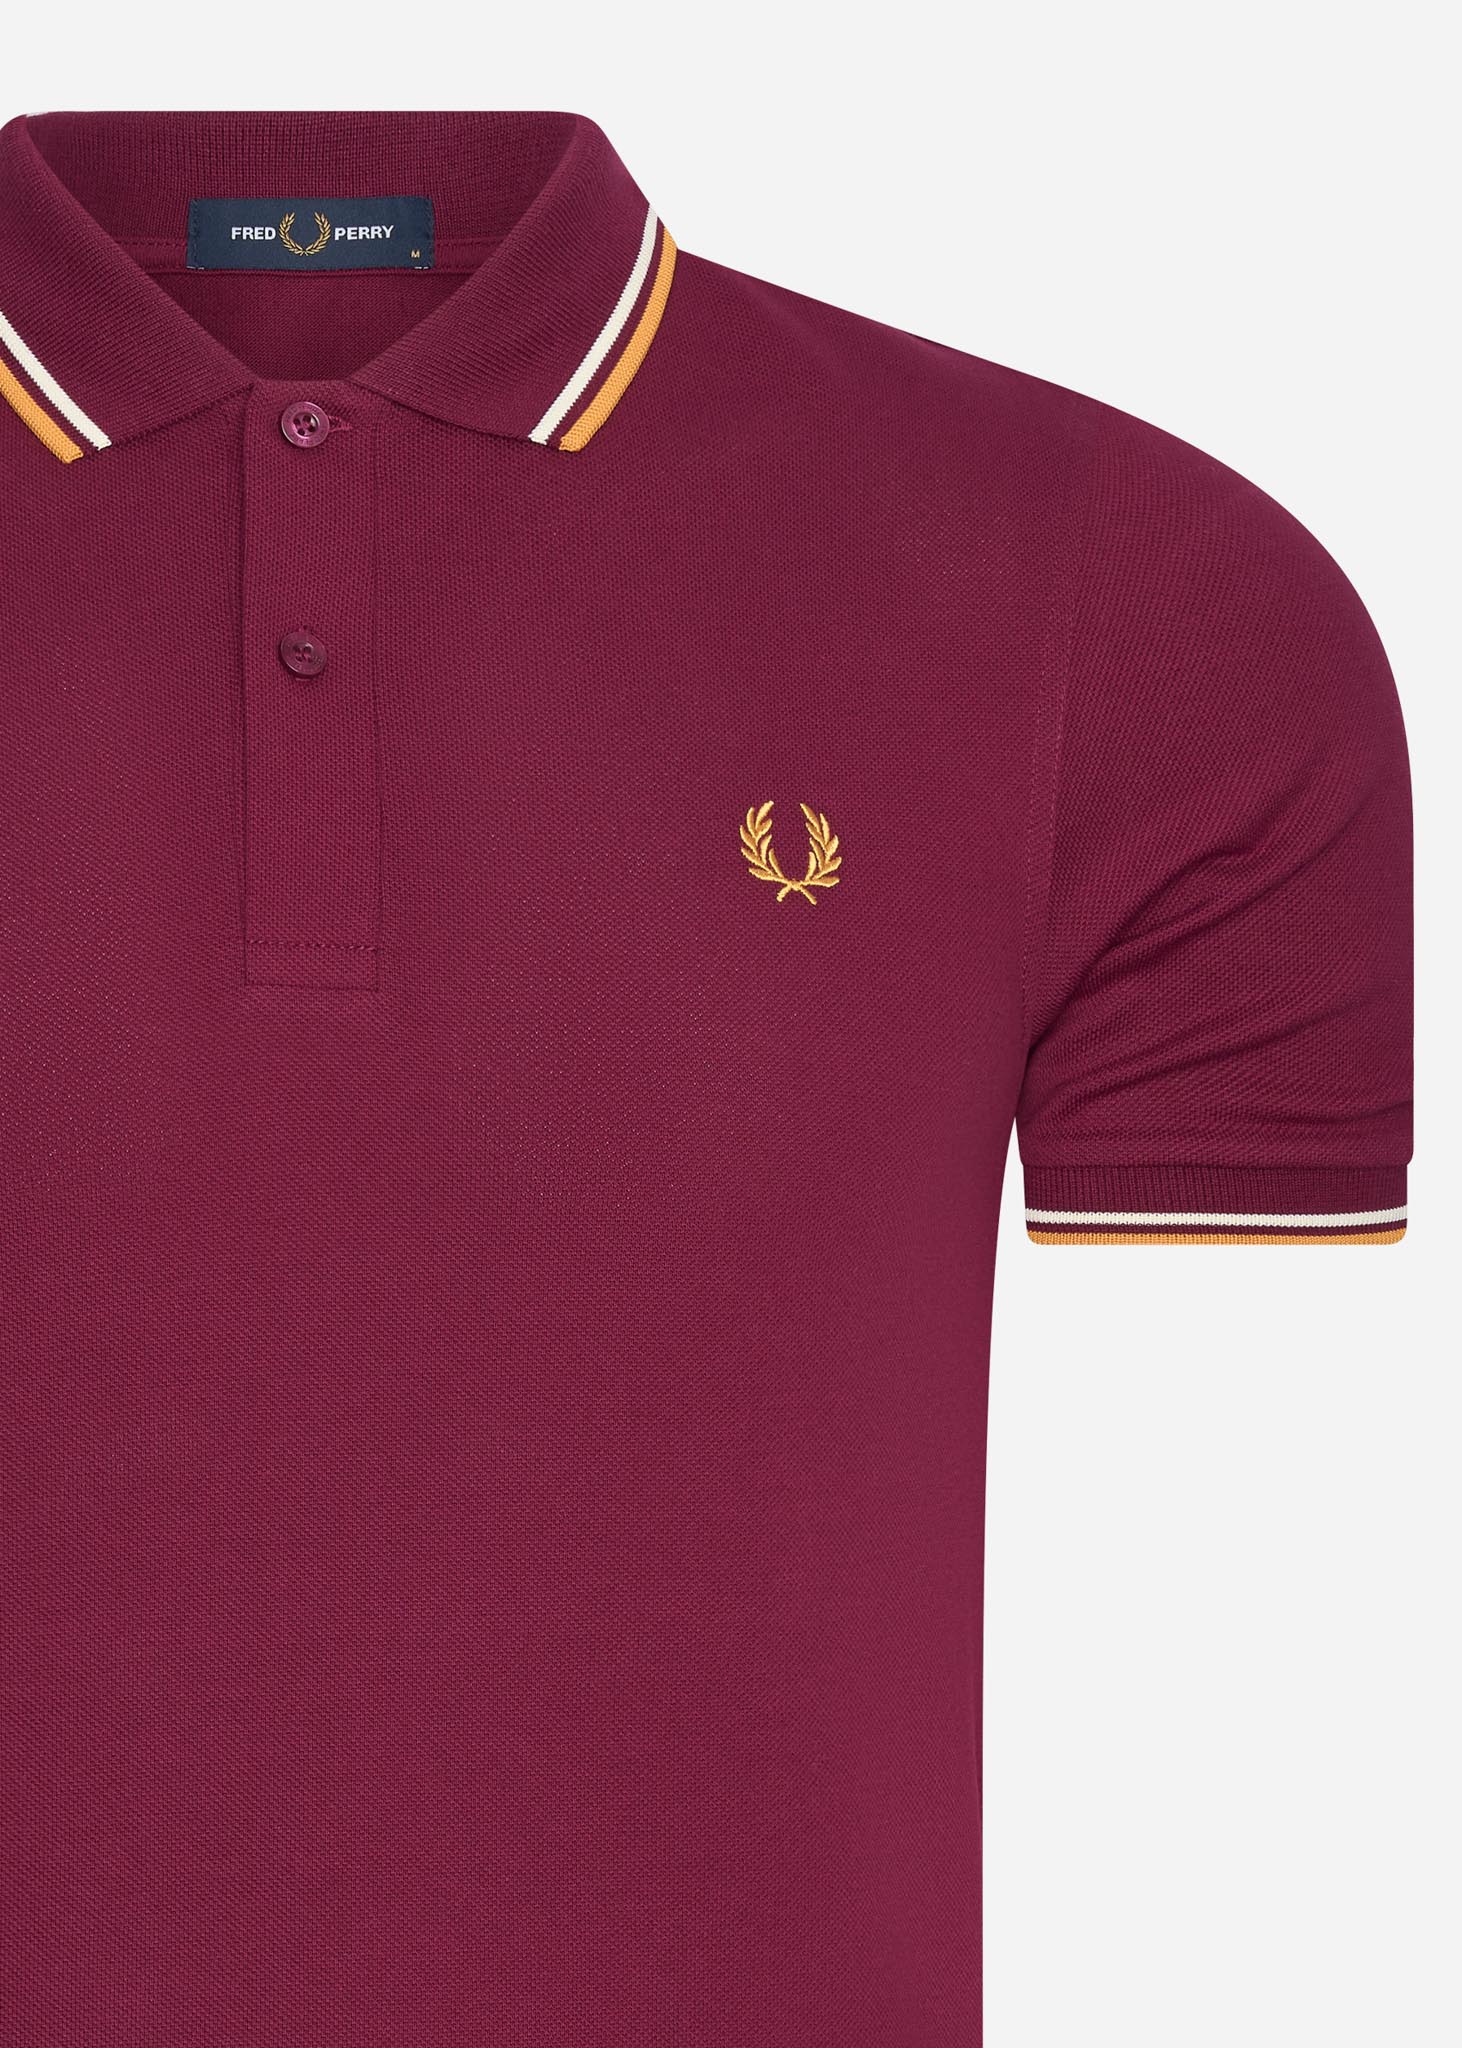 Fred Perry Polo's  Twin tipped fred perry shirt - tawny port gold gold 